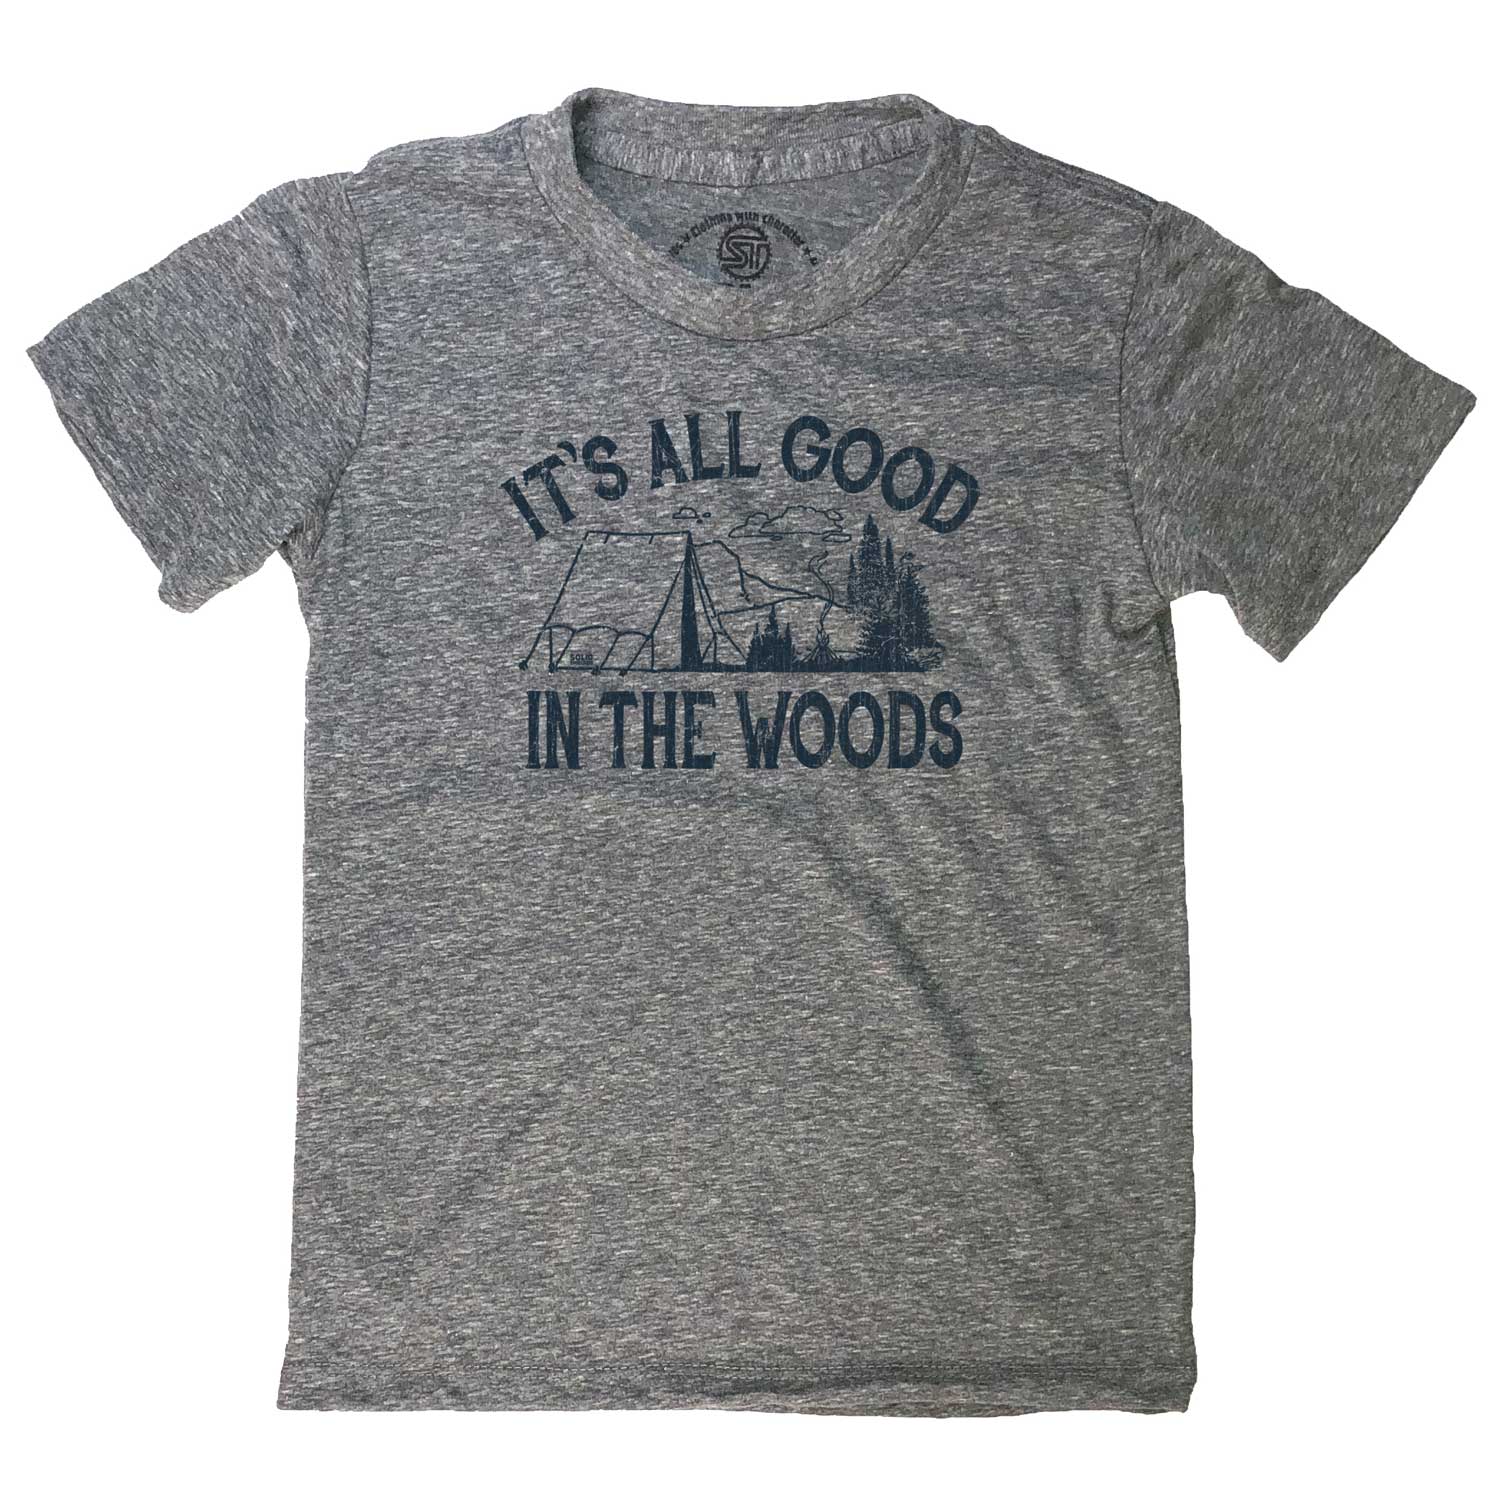 Kid's It's All Good in the Woods Retro Nature Graphic Tee | Funny Camping T-shirt | Solid Threads